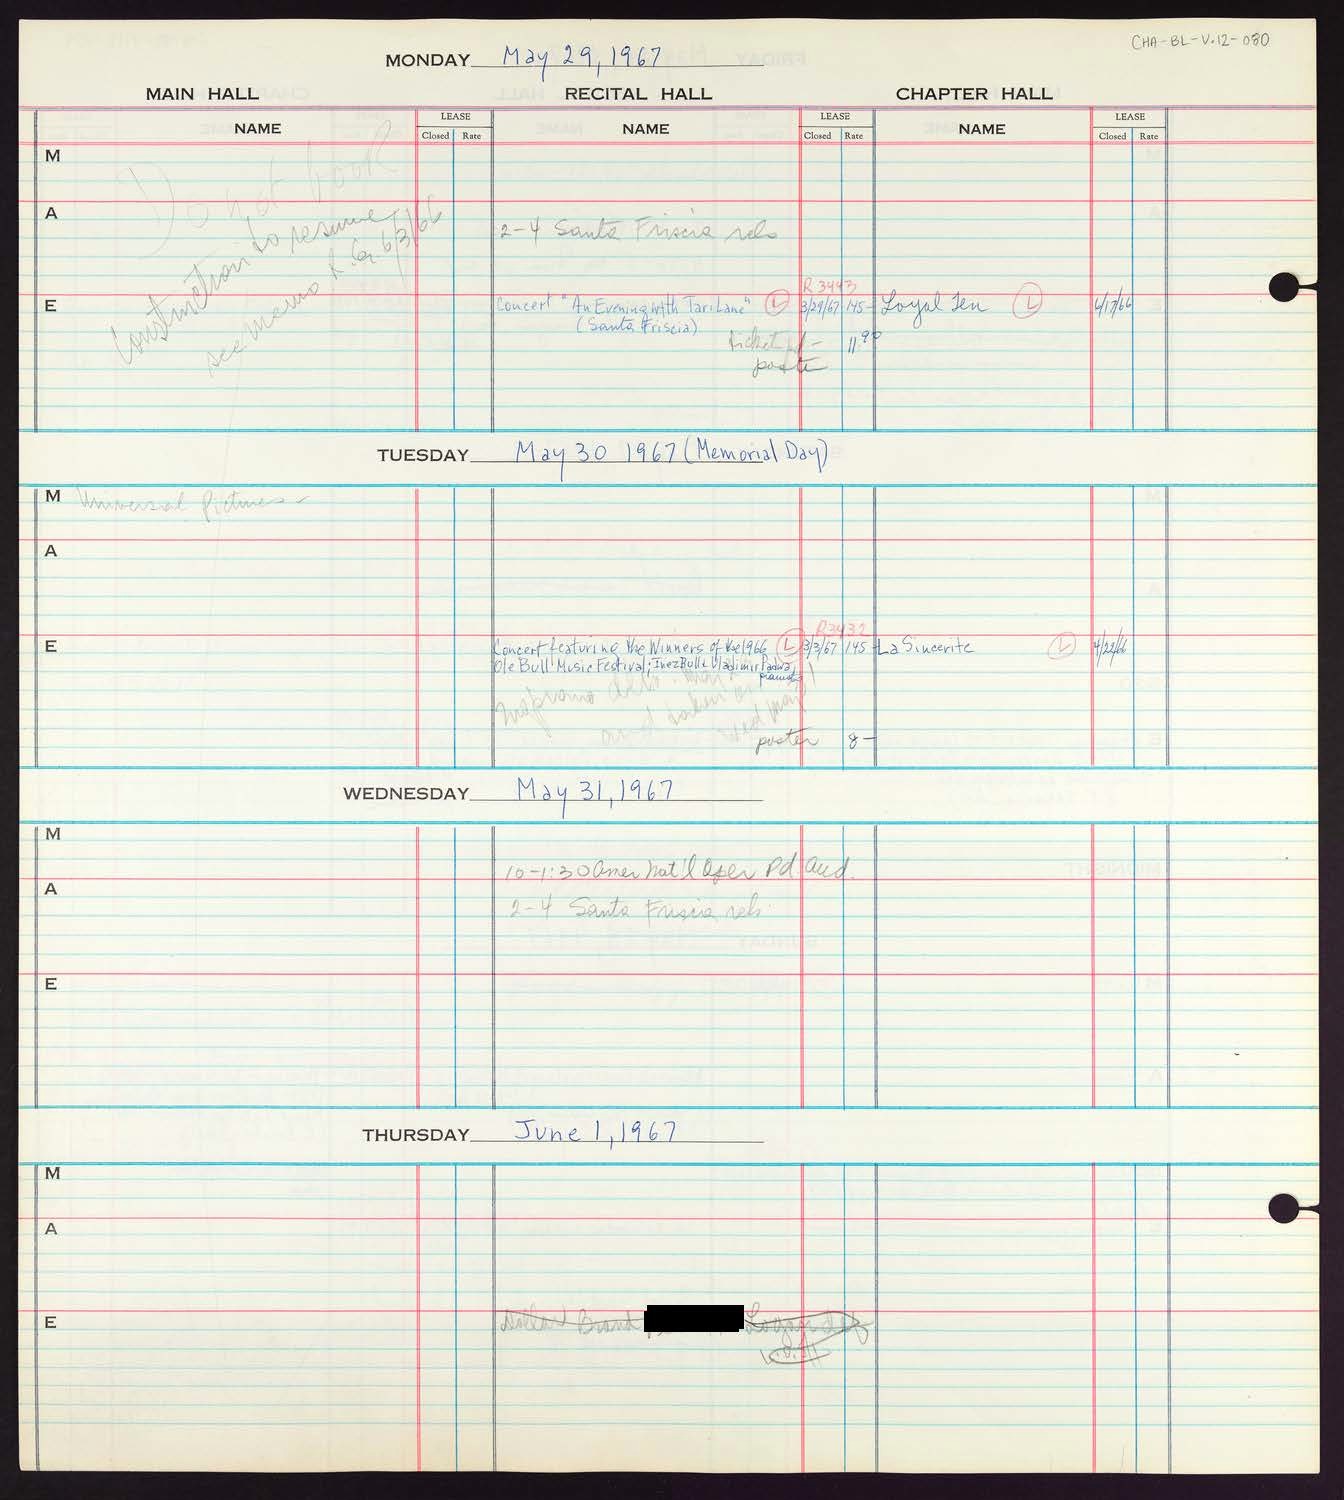 Carnegie Hall Booking Ledger, volume 12, page 80